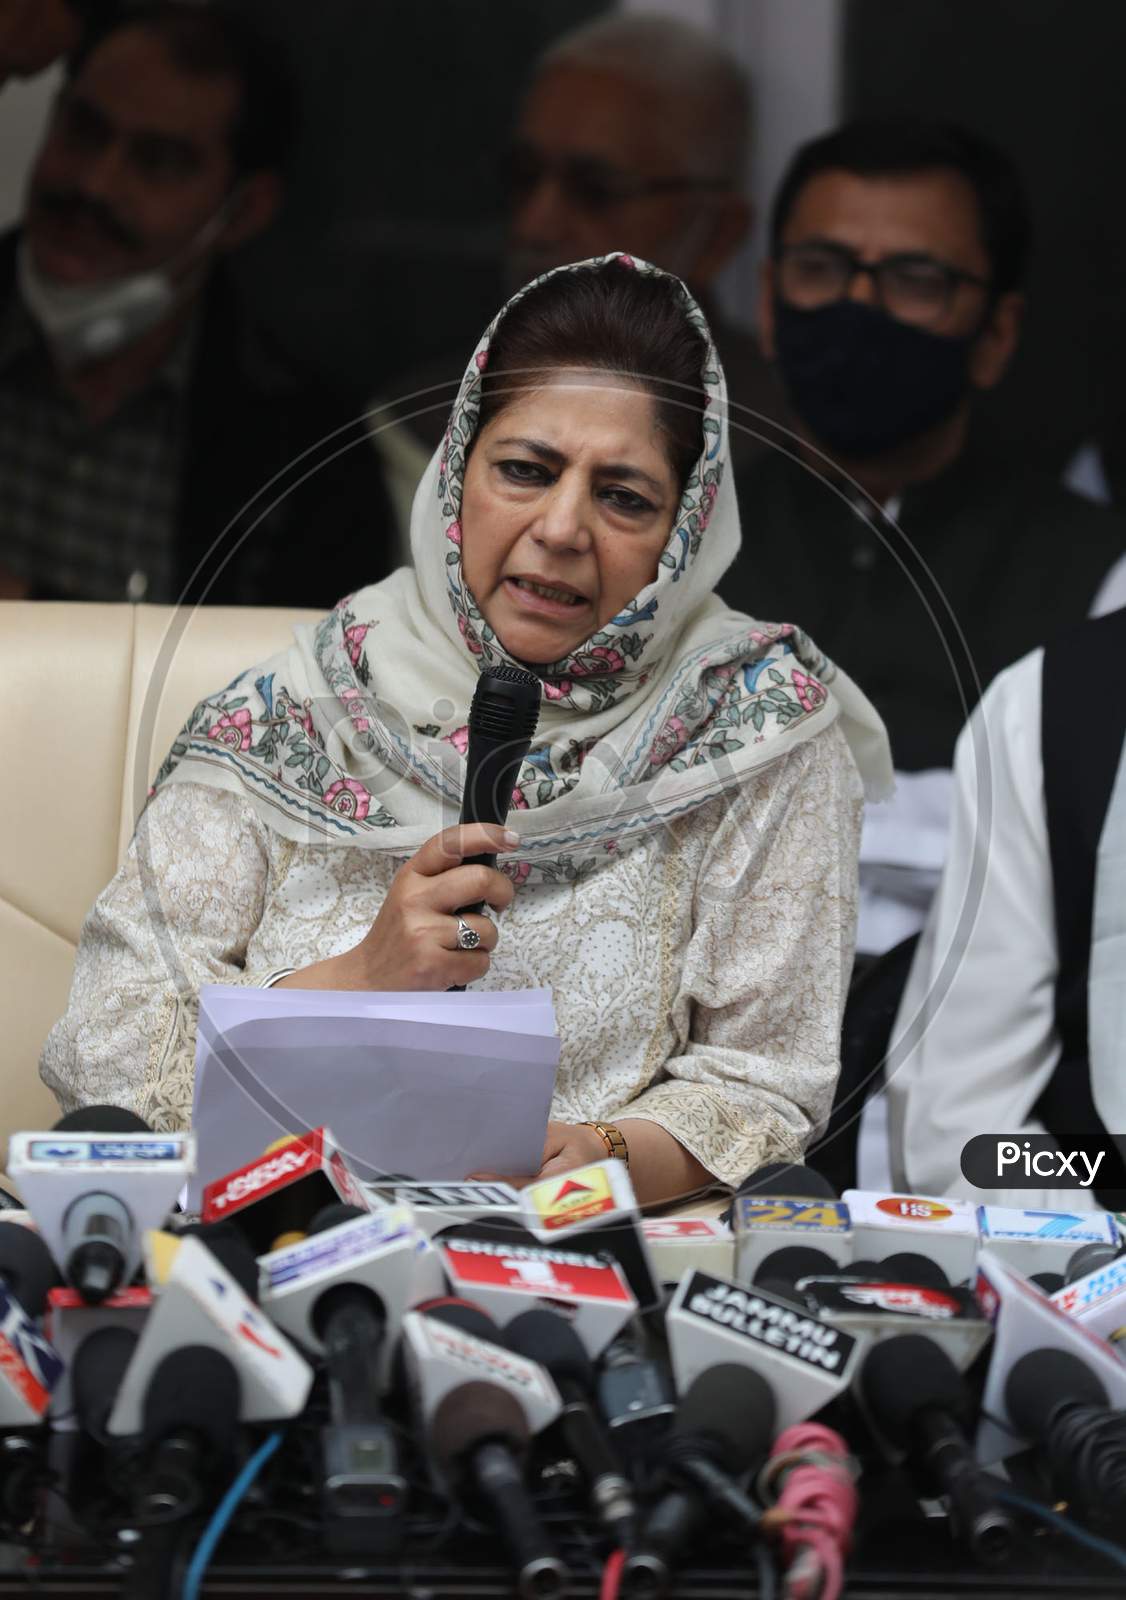 Peoples Democratic Party (PDP) President Mehbooba Mufti addresses Press Confrence at party HQ in Jammu,9 November.2020.